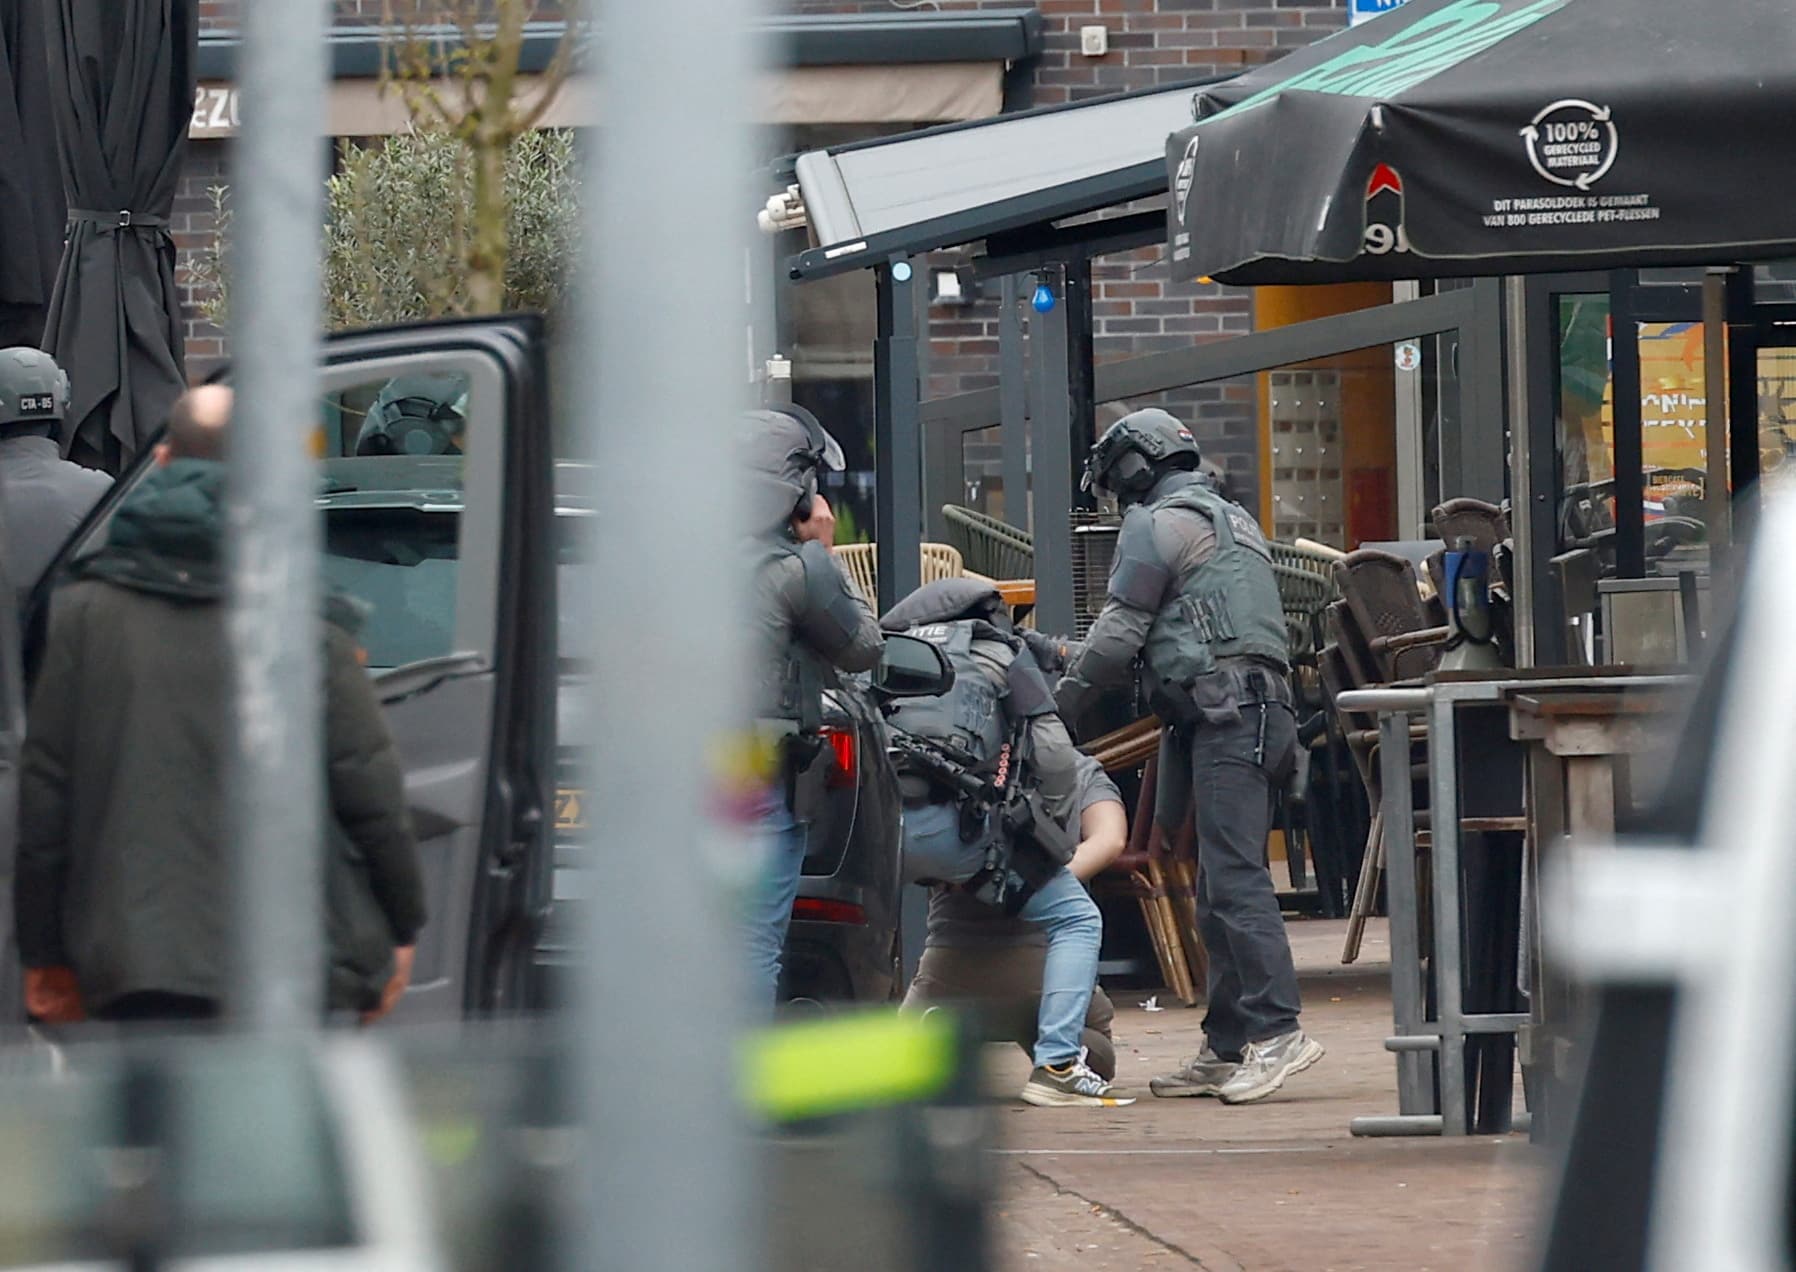 image Dutch nightclub hostage drama ends peacefully with arrest of suspect (Updated)